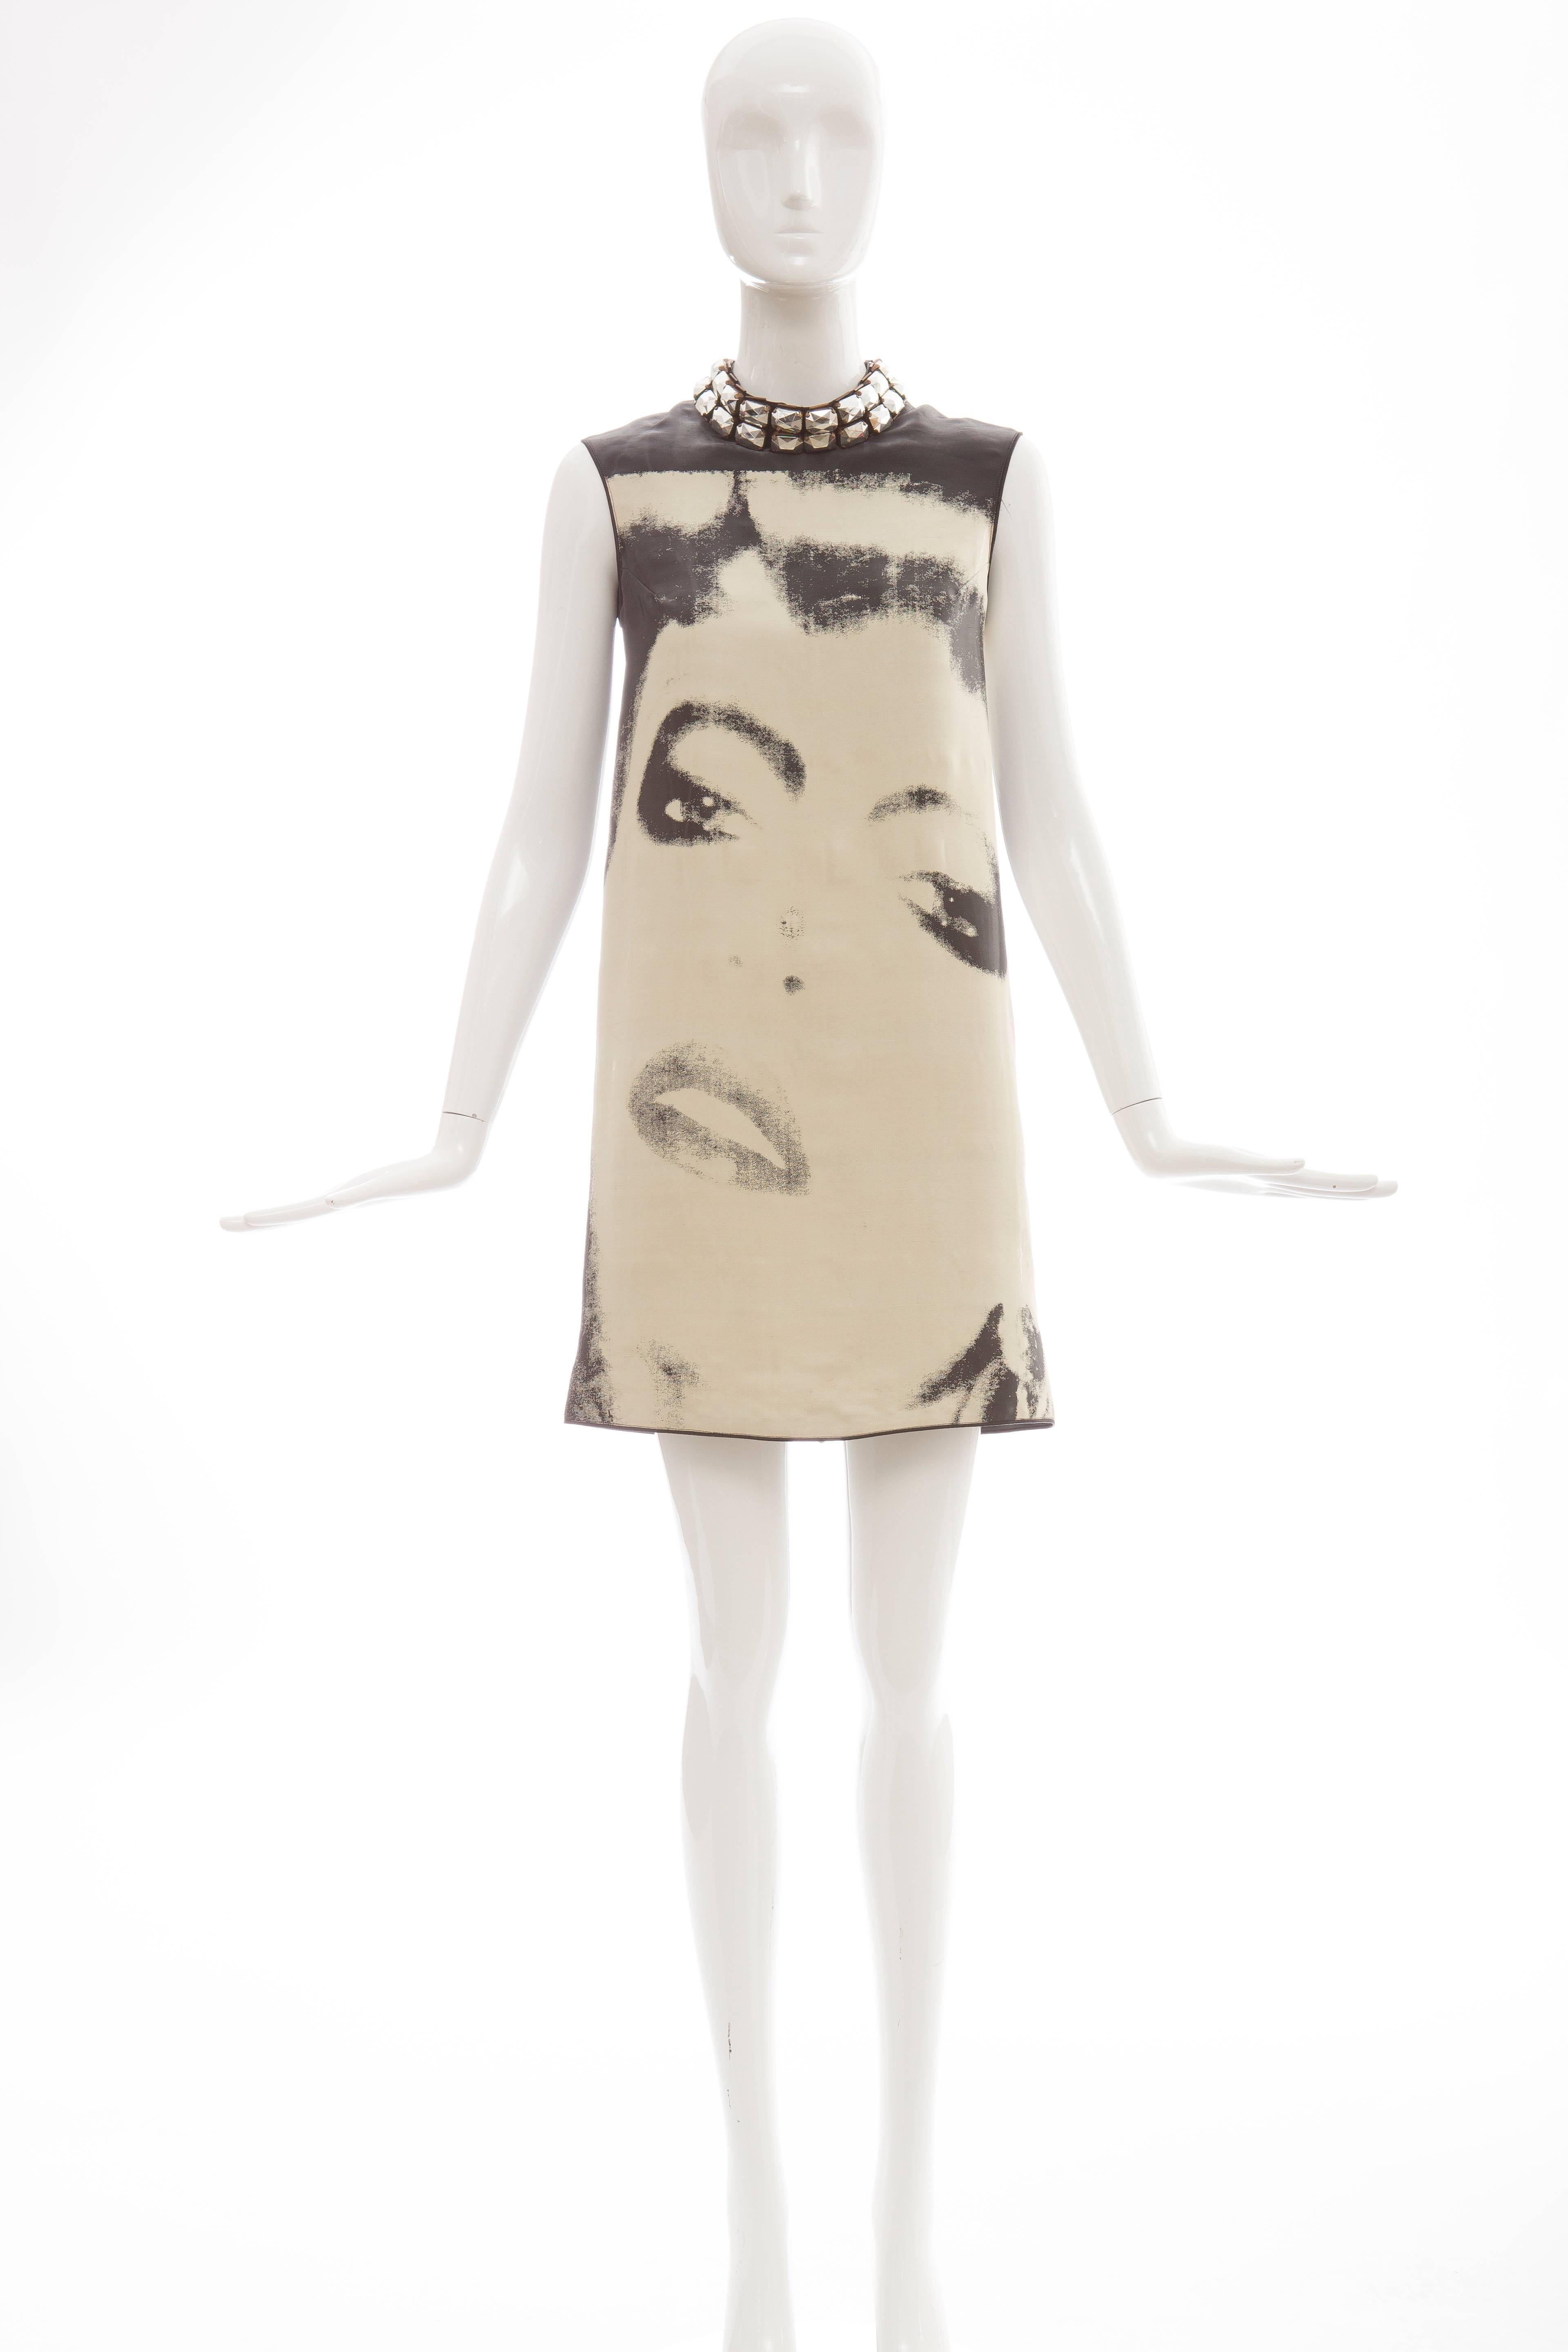 Alber Elbaz for Lanvin, Spring-Summer 2007,sleeveless silk, nylon shift dress with faceted embellishments at neckline, face print at front, exposed back zip and fully lined. AD Campaign: Spring-Summer 2007

FR. 34
US. 2
Bust: 35